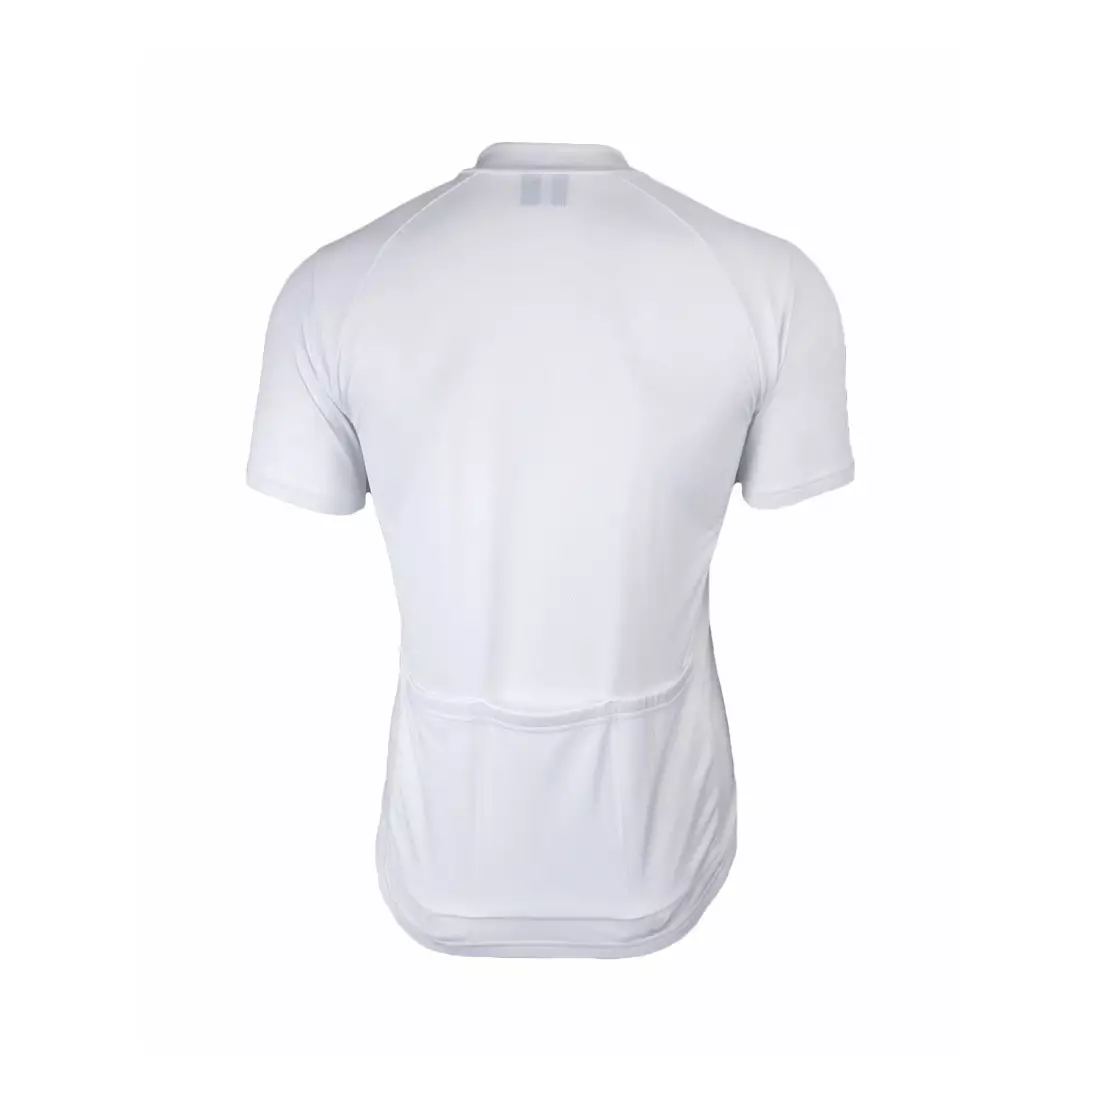 ROGELLI SOLID - men's cycling jersey, Color: White